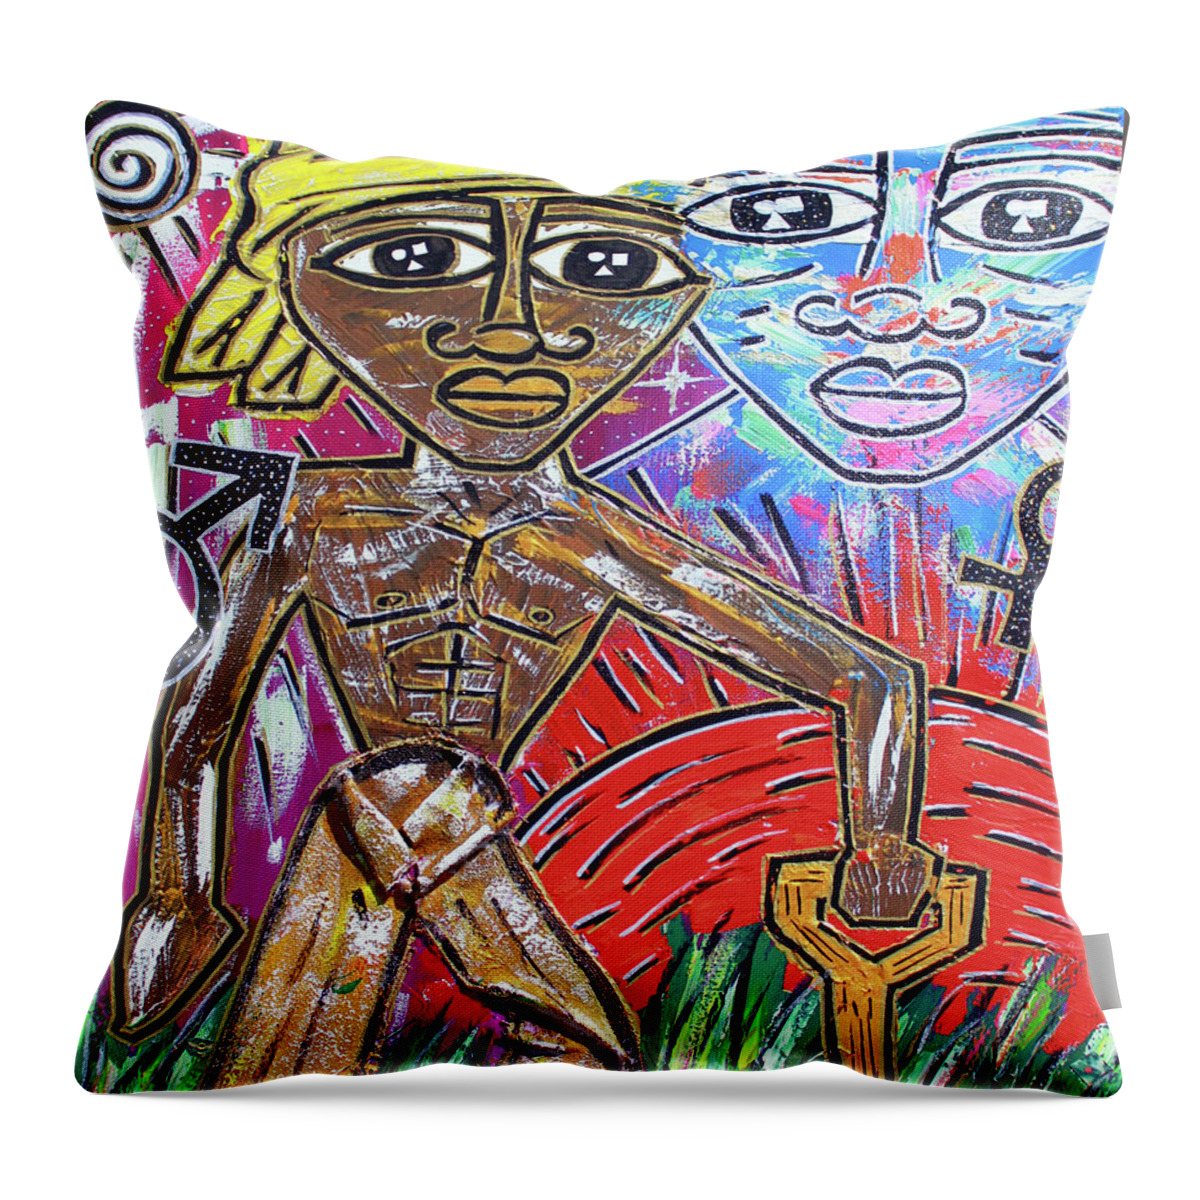  Throw Pillow featuring the painting Divine Unions by Odalo Wasikhongo